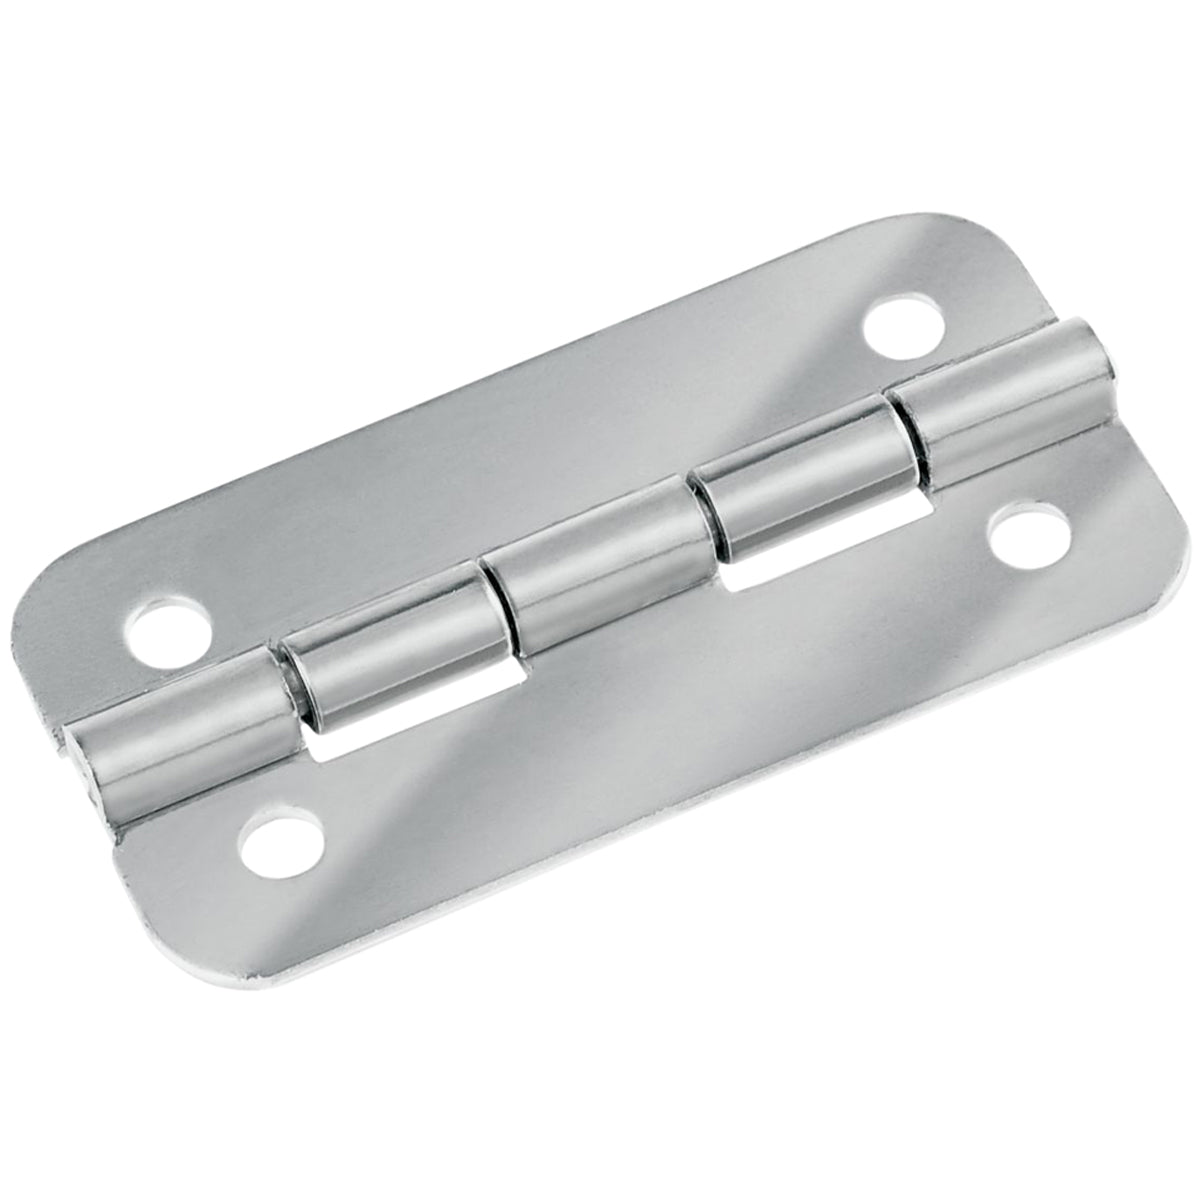 IGLOO Replacement Cooler Hinges - Stainless Steel IGLOO